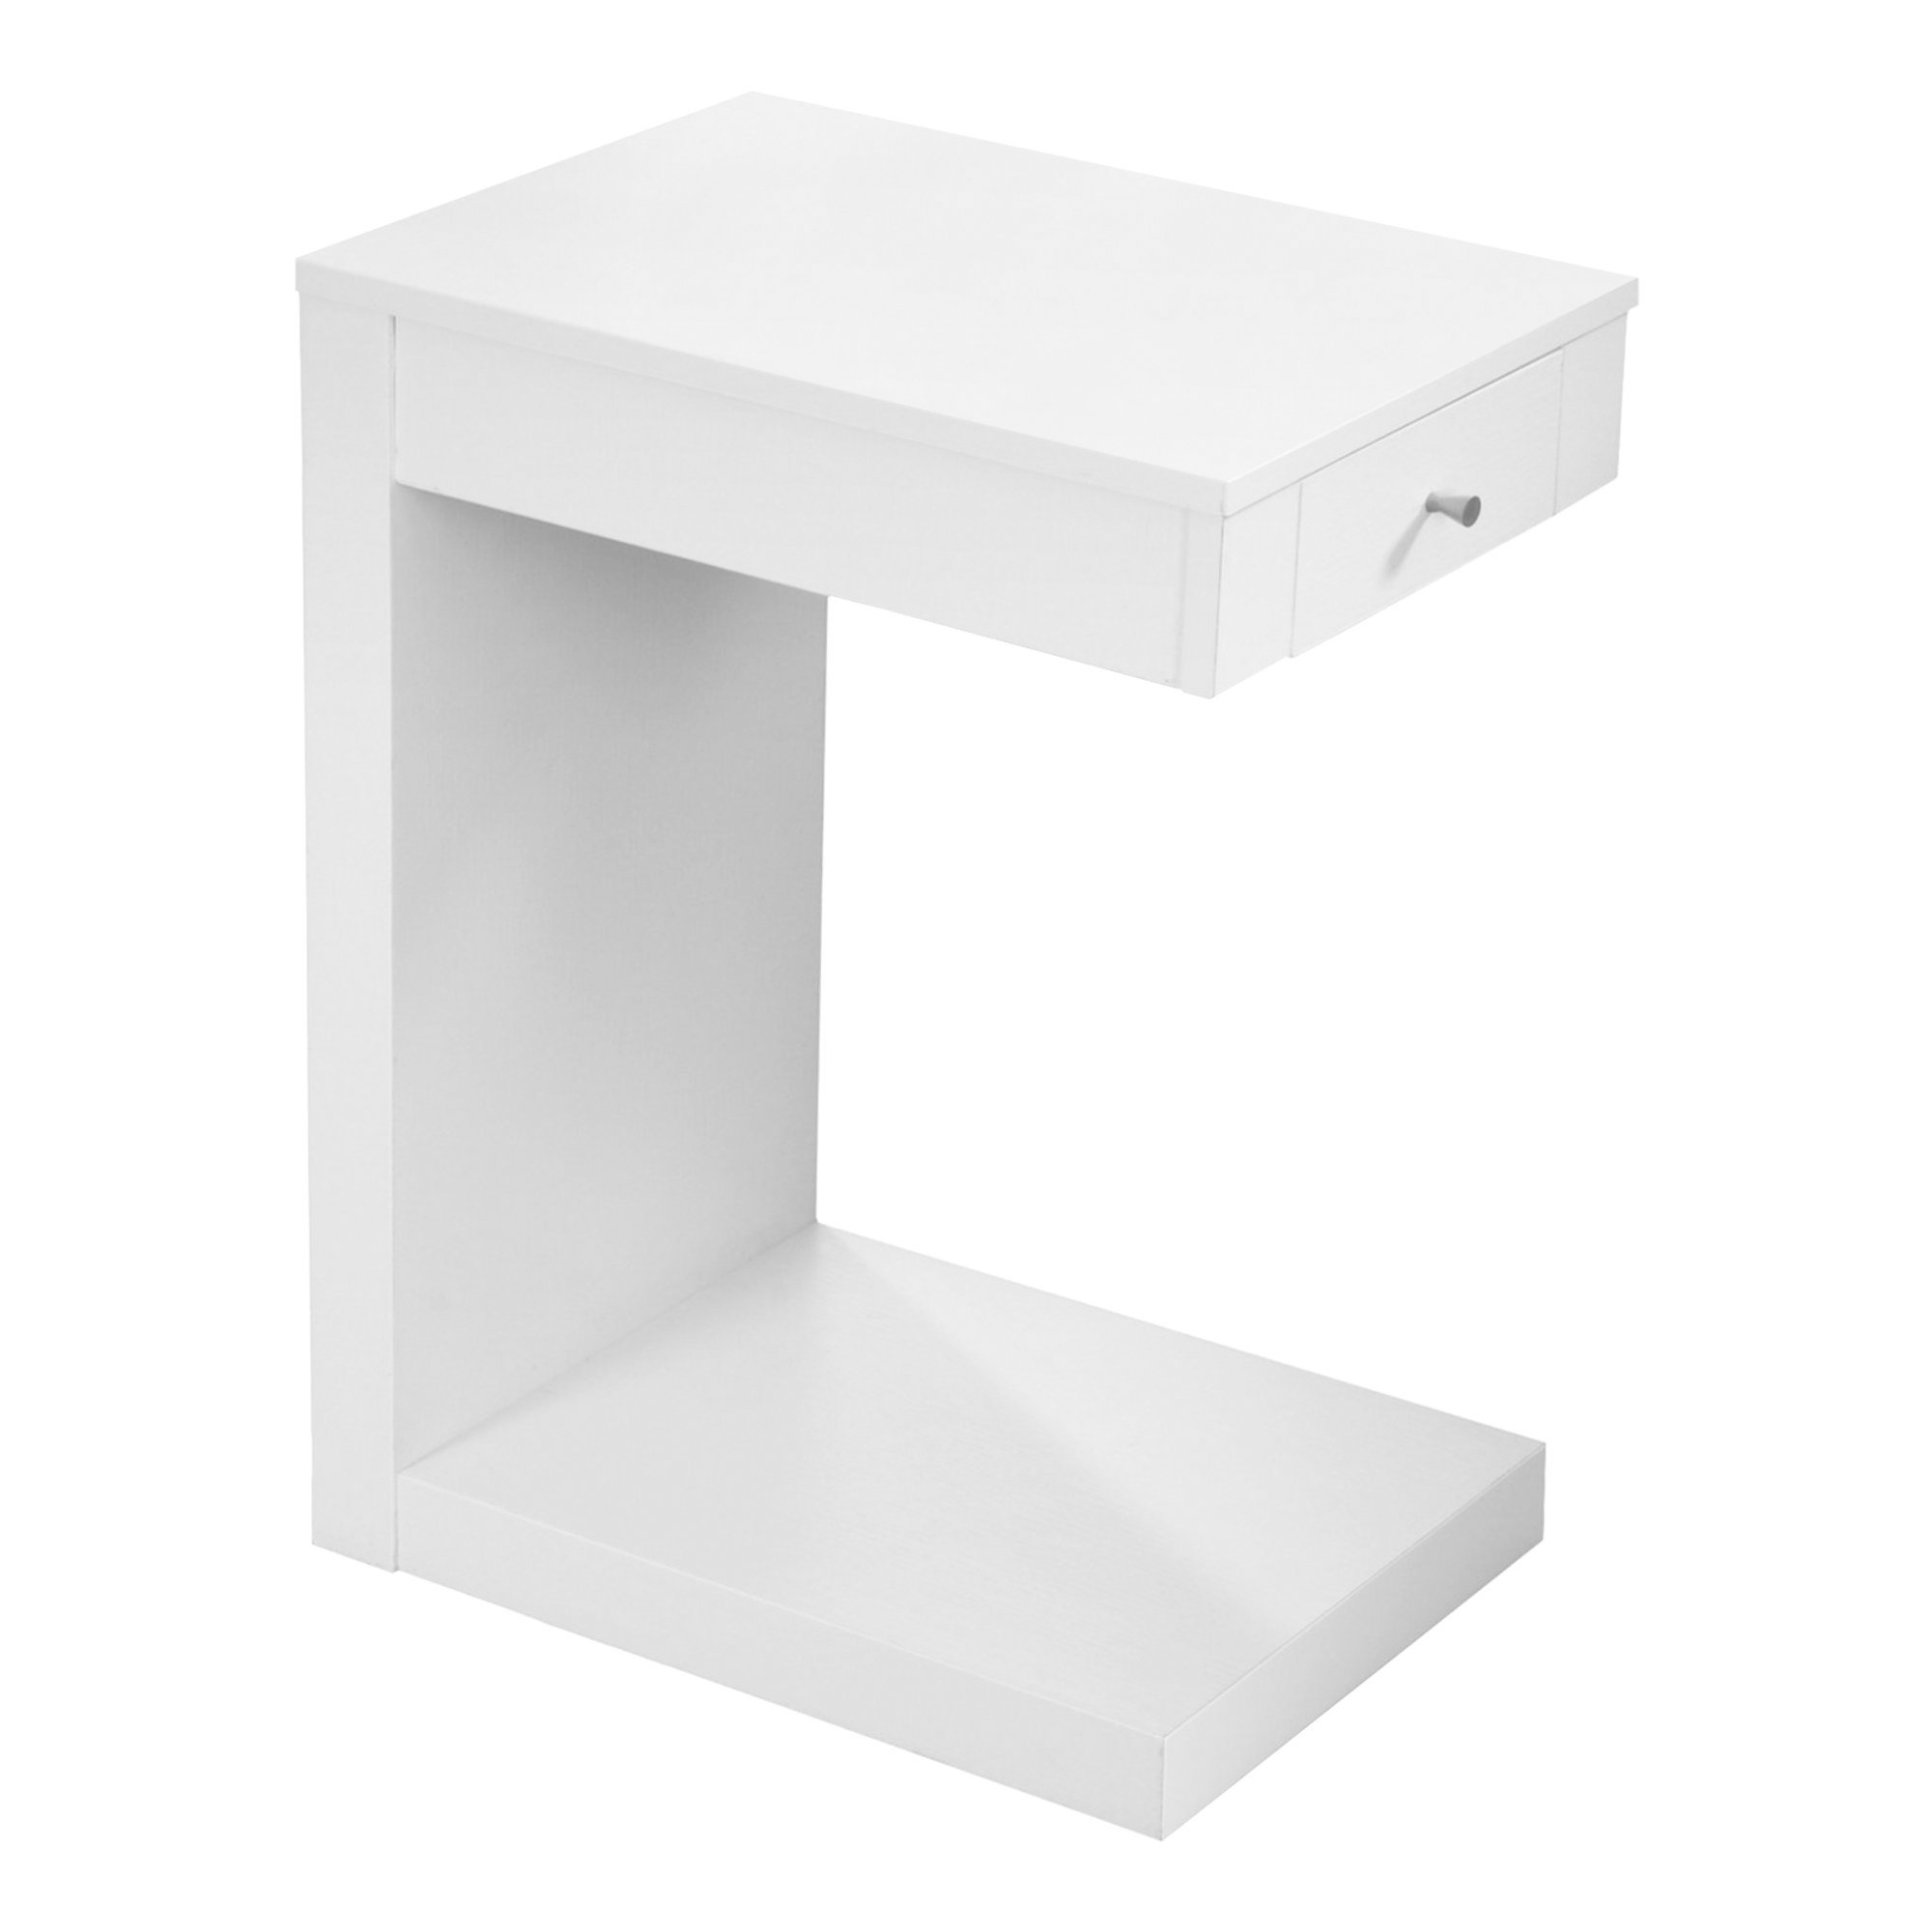 18.25" x 12" x 24" White Finish Hollow Core Accent Table